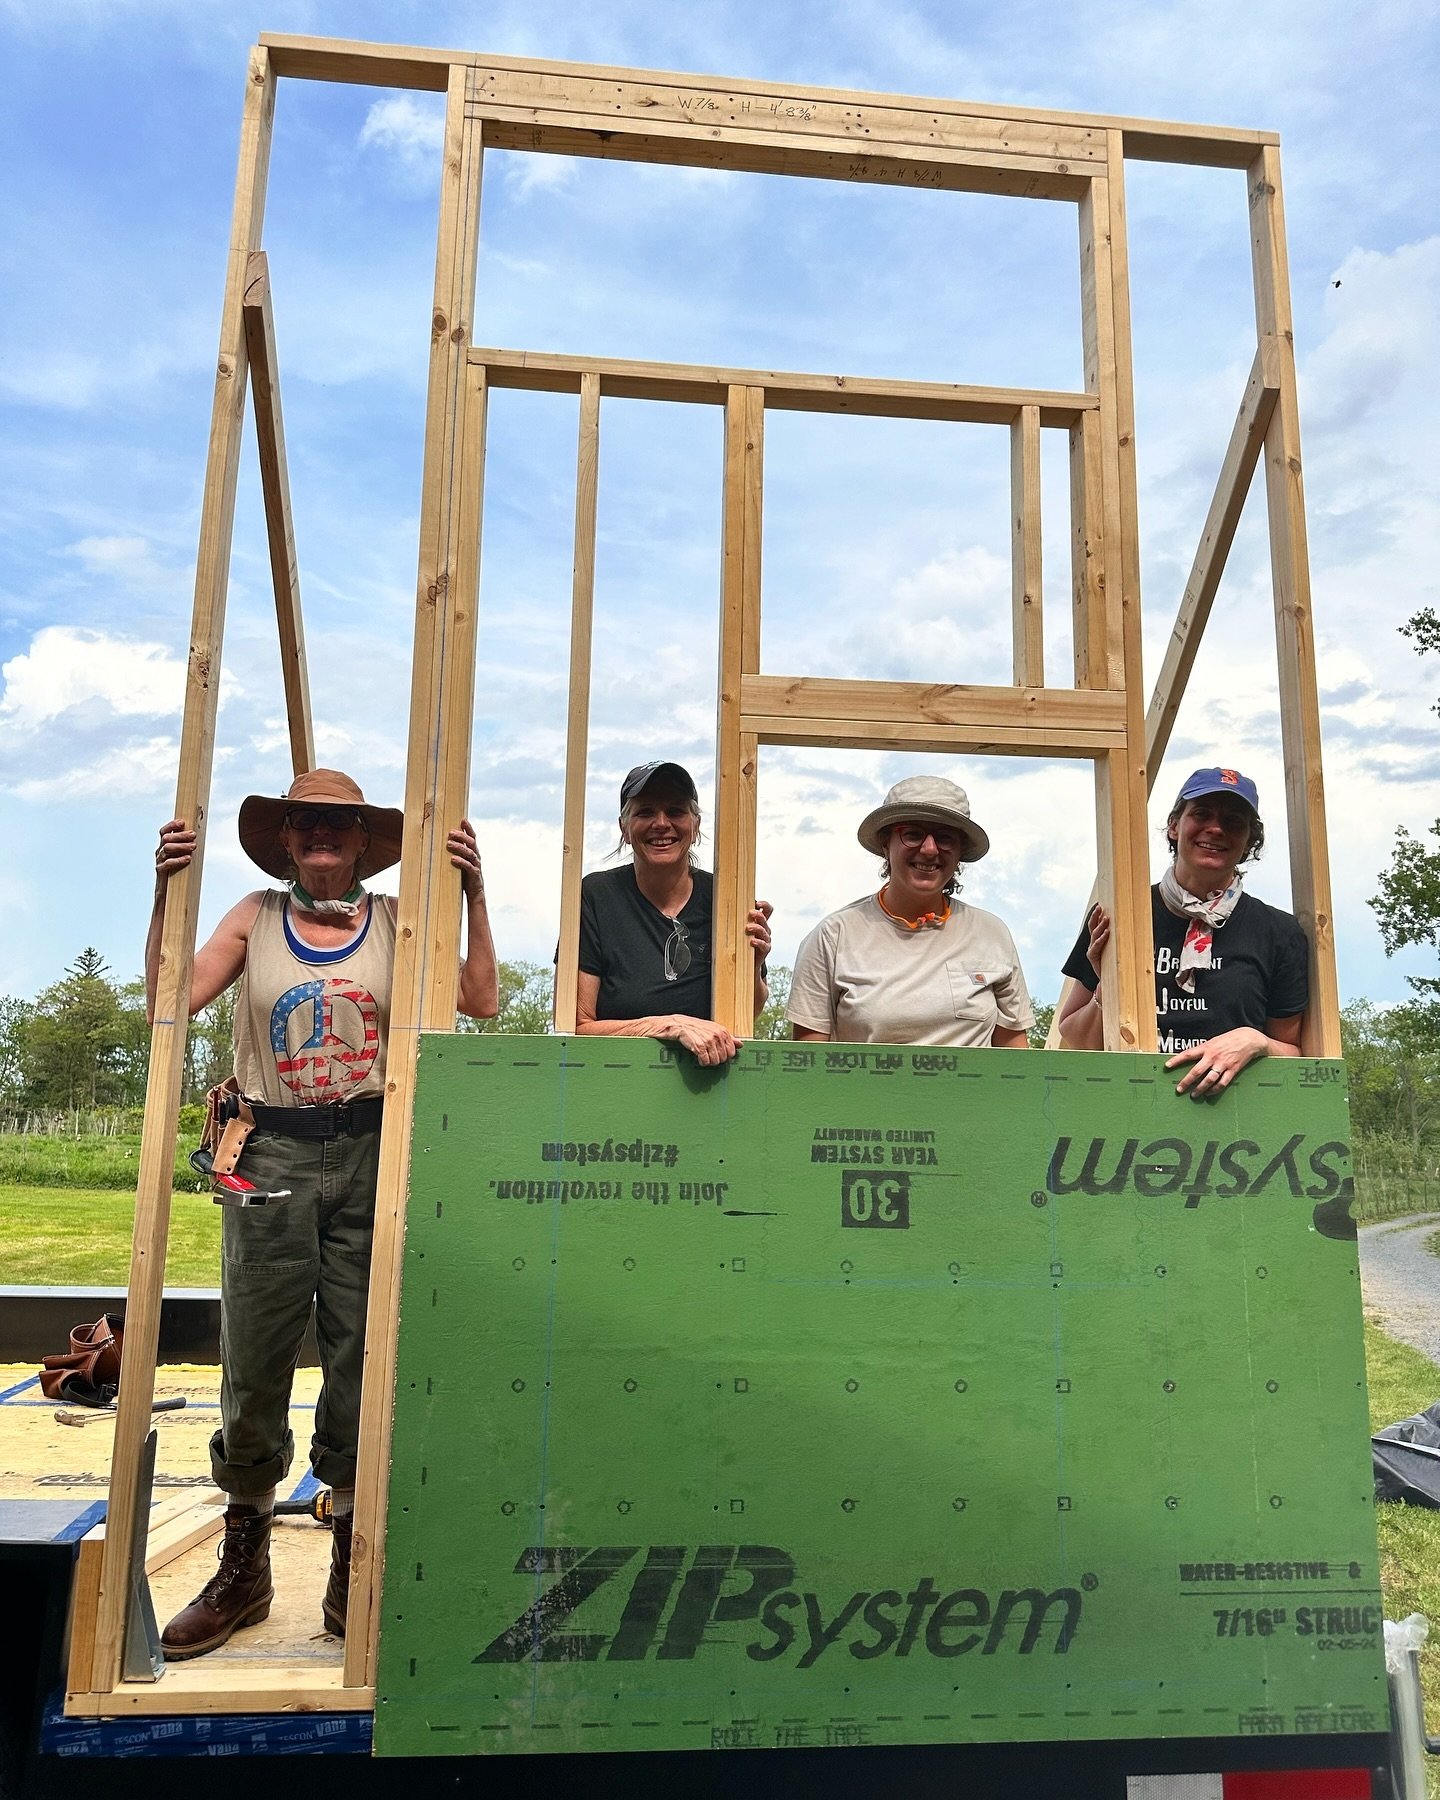 First wall section: framed and raised ✅ 
Want to learn to build or renovate a house? Have windows to replace? Our next class is Tiny House Dry-In: Sheathing and Windows on June 3-7! This is a beginner accessible class that goes over basic carpentry s